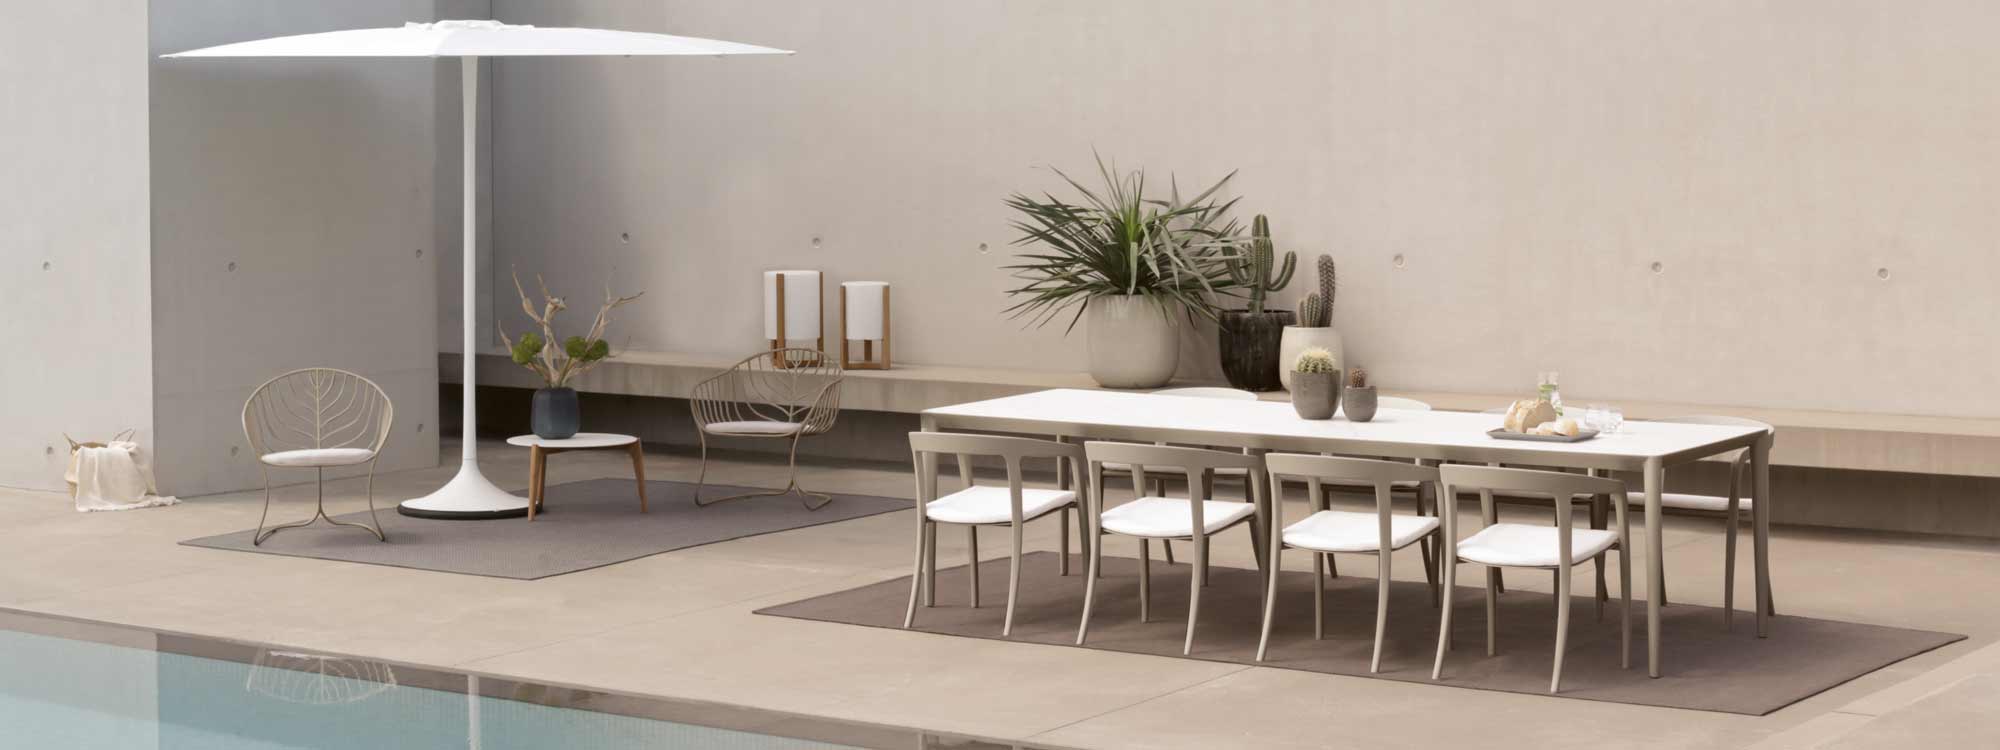 Image of sand-colored Jive chairs and U-nite garden table by Royal Botania